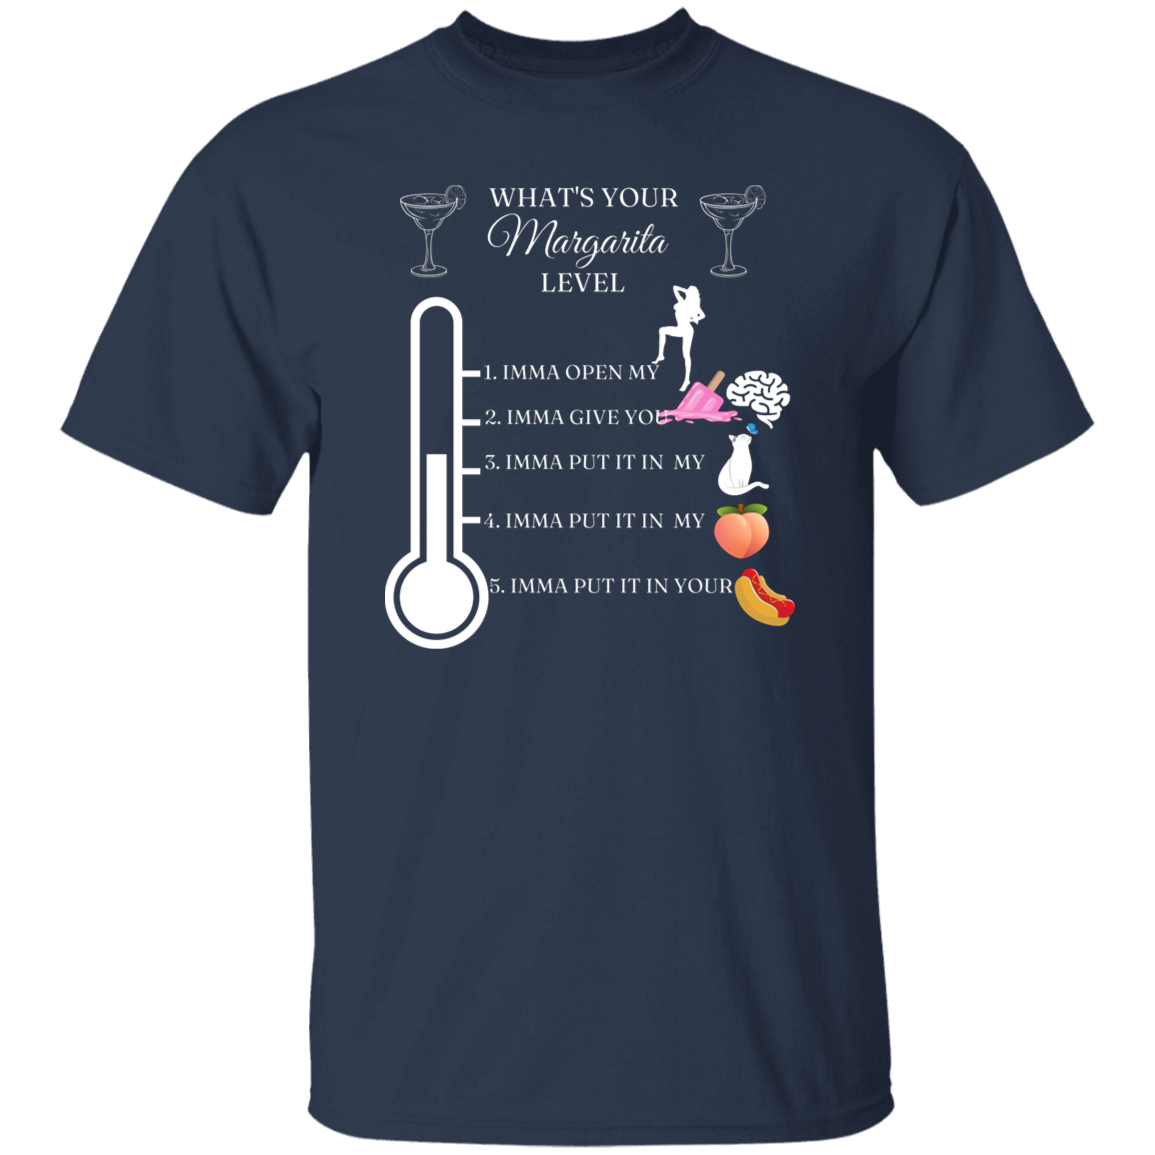 WHAT'S YOUR MARGARITA LEVEL. T-Shirt